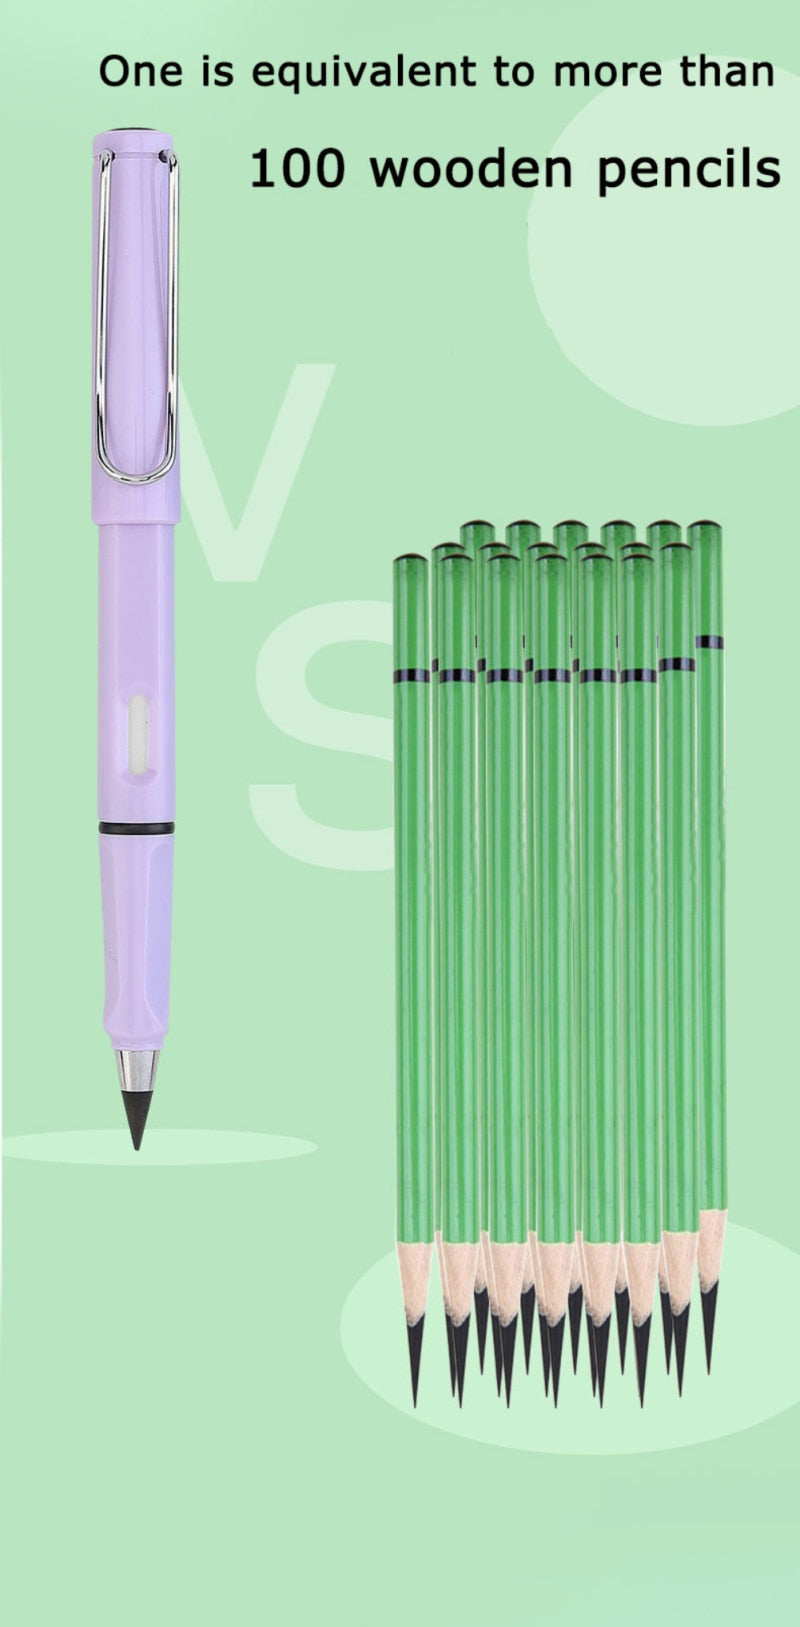 SUSTAINCILE™ - Sustainable Everlasting Inkless Pencil - FREE TODAY!